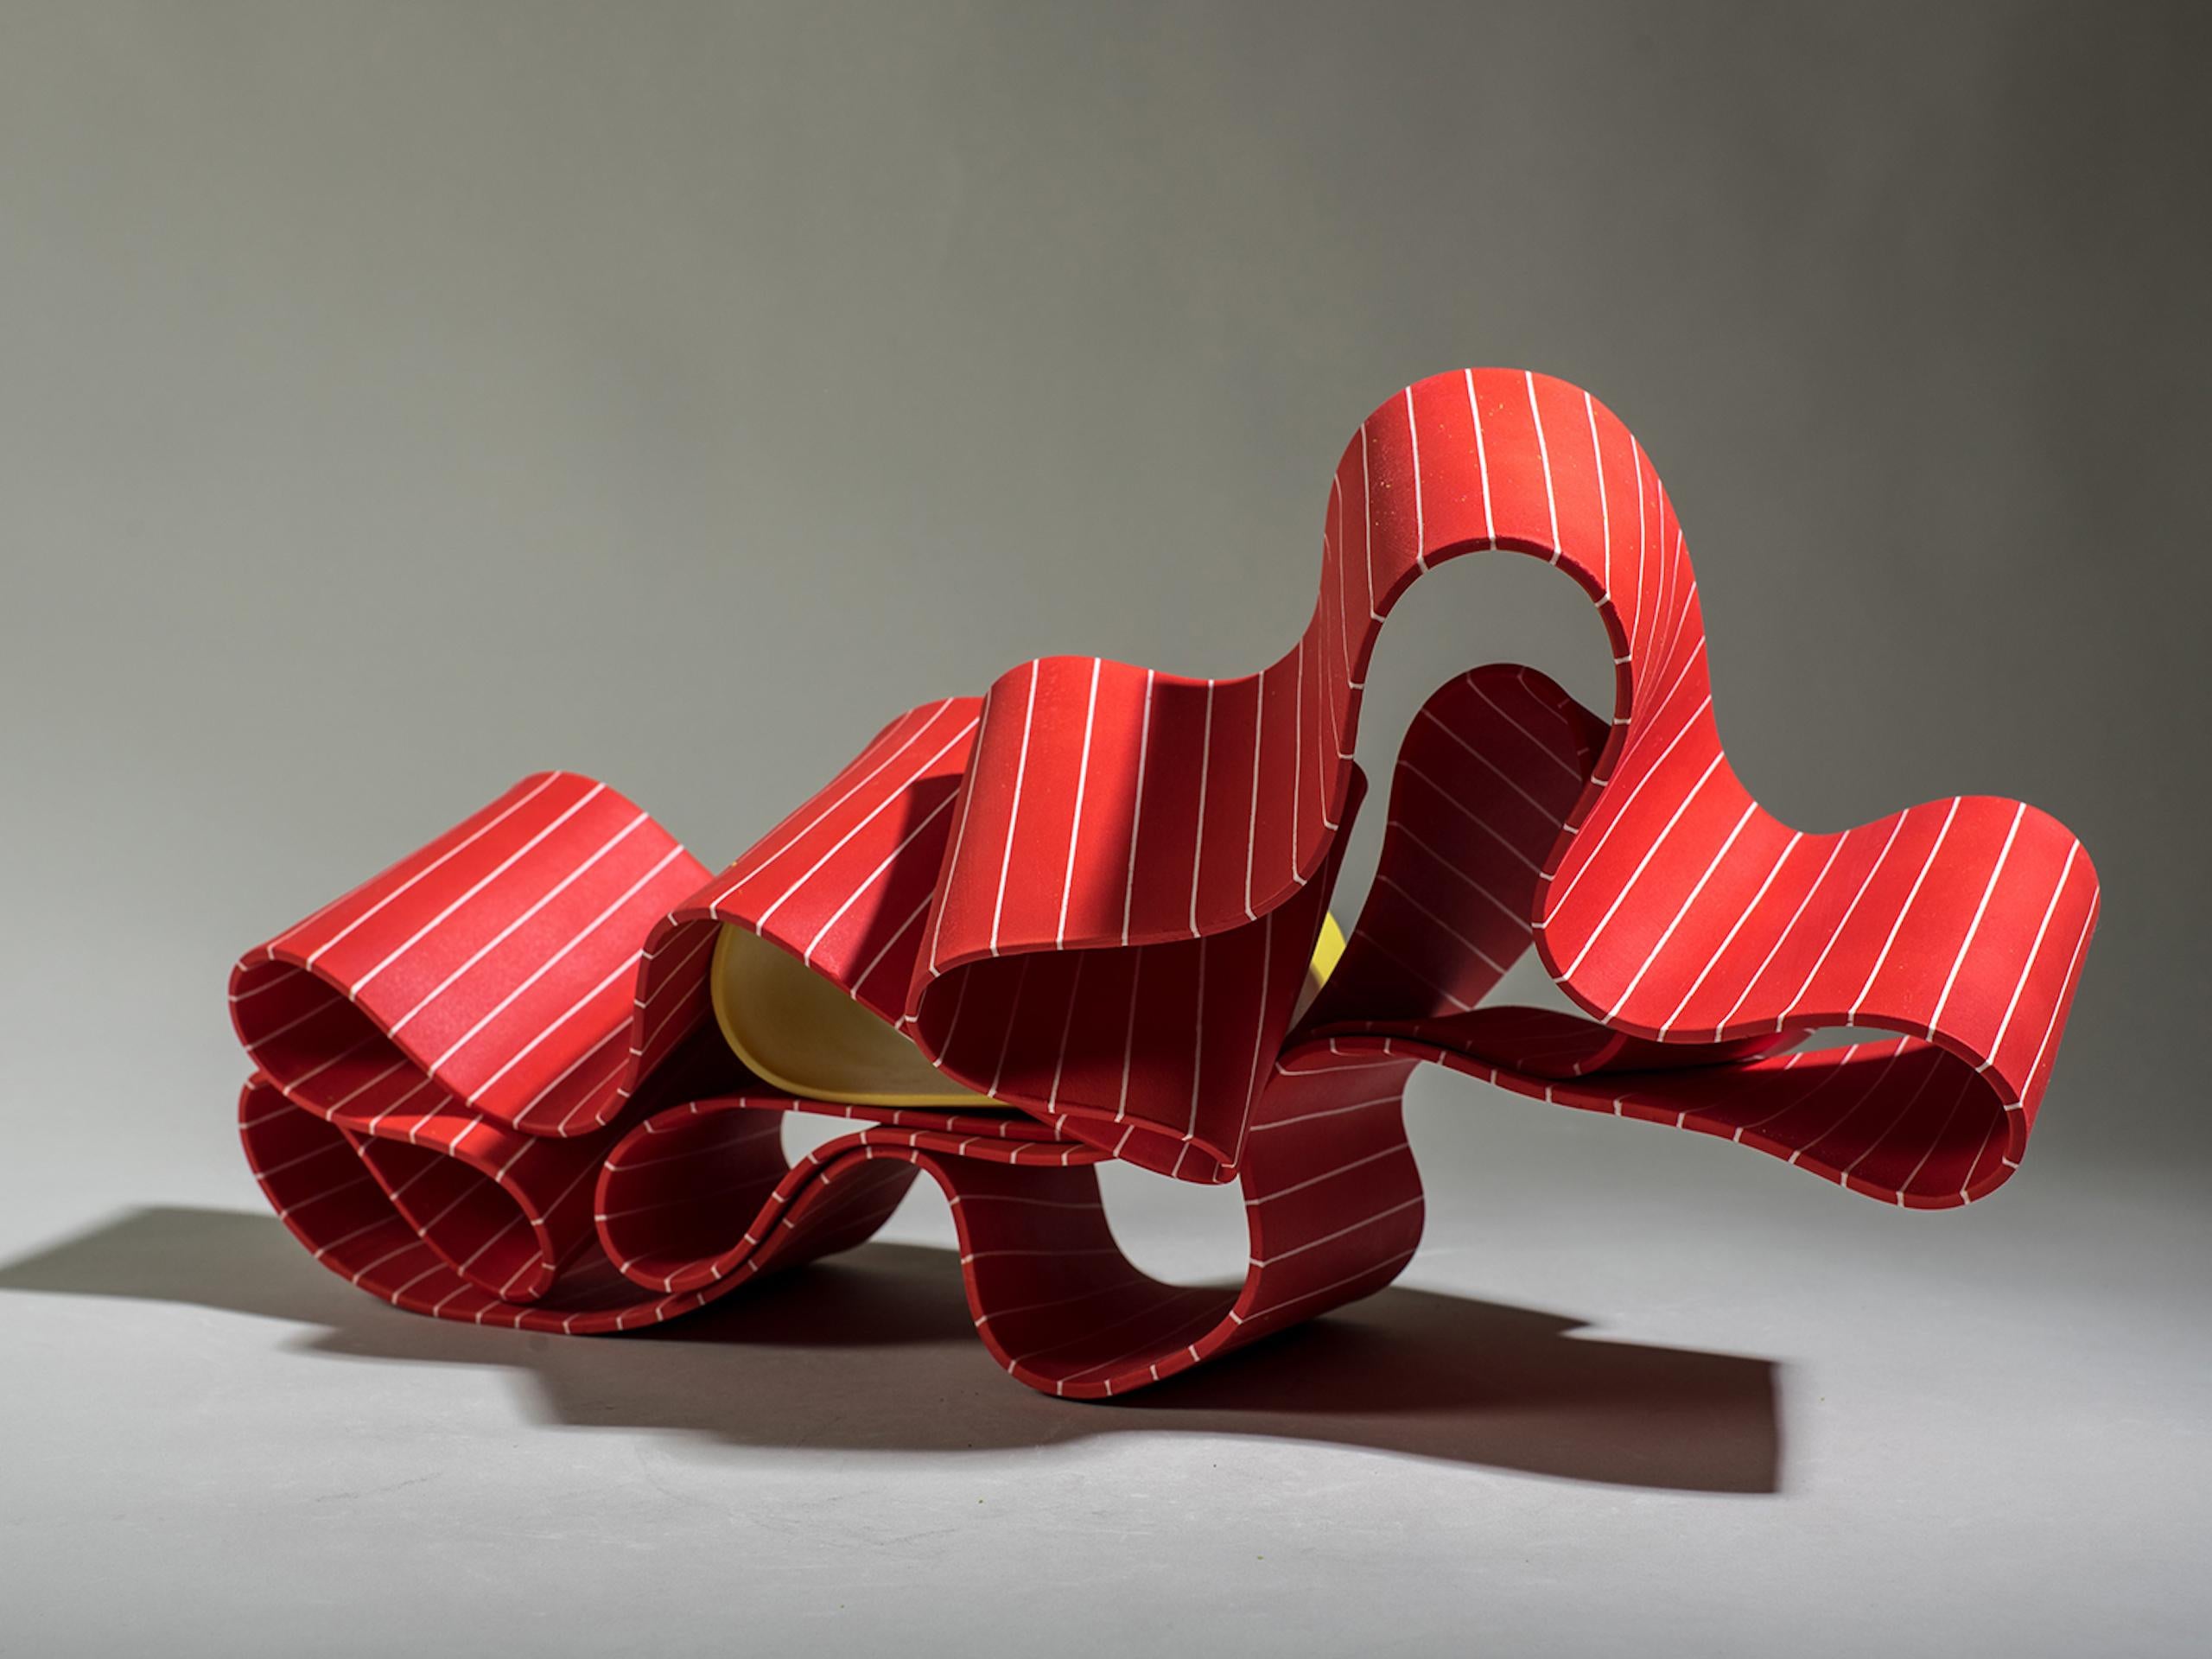 Folding in Motion 1 by Simcha Even-Chen - porcelain sculpture, red and yellow For Sale 4